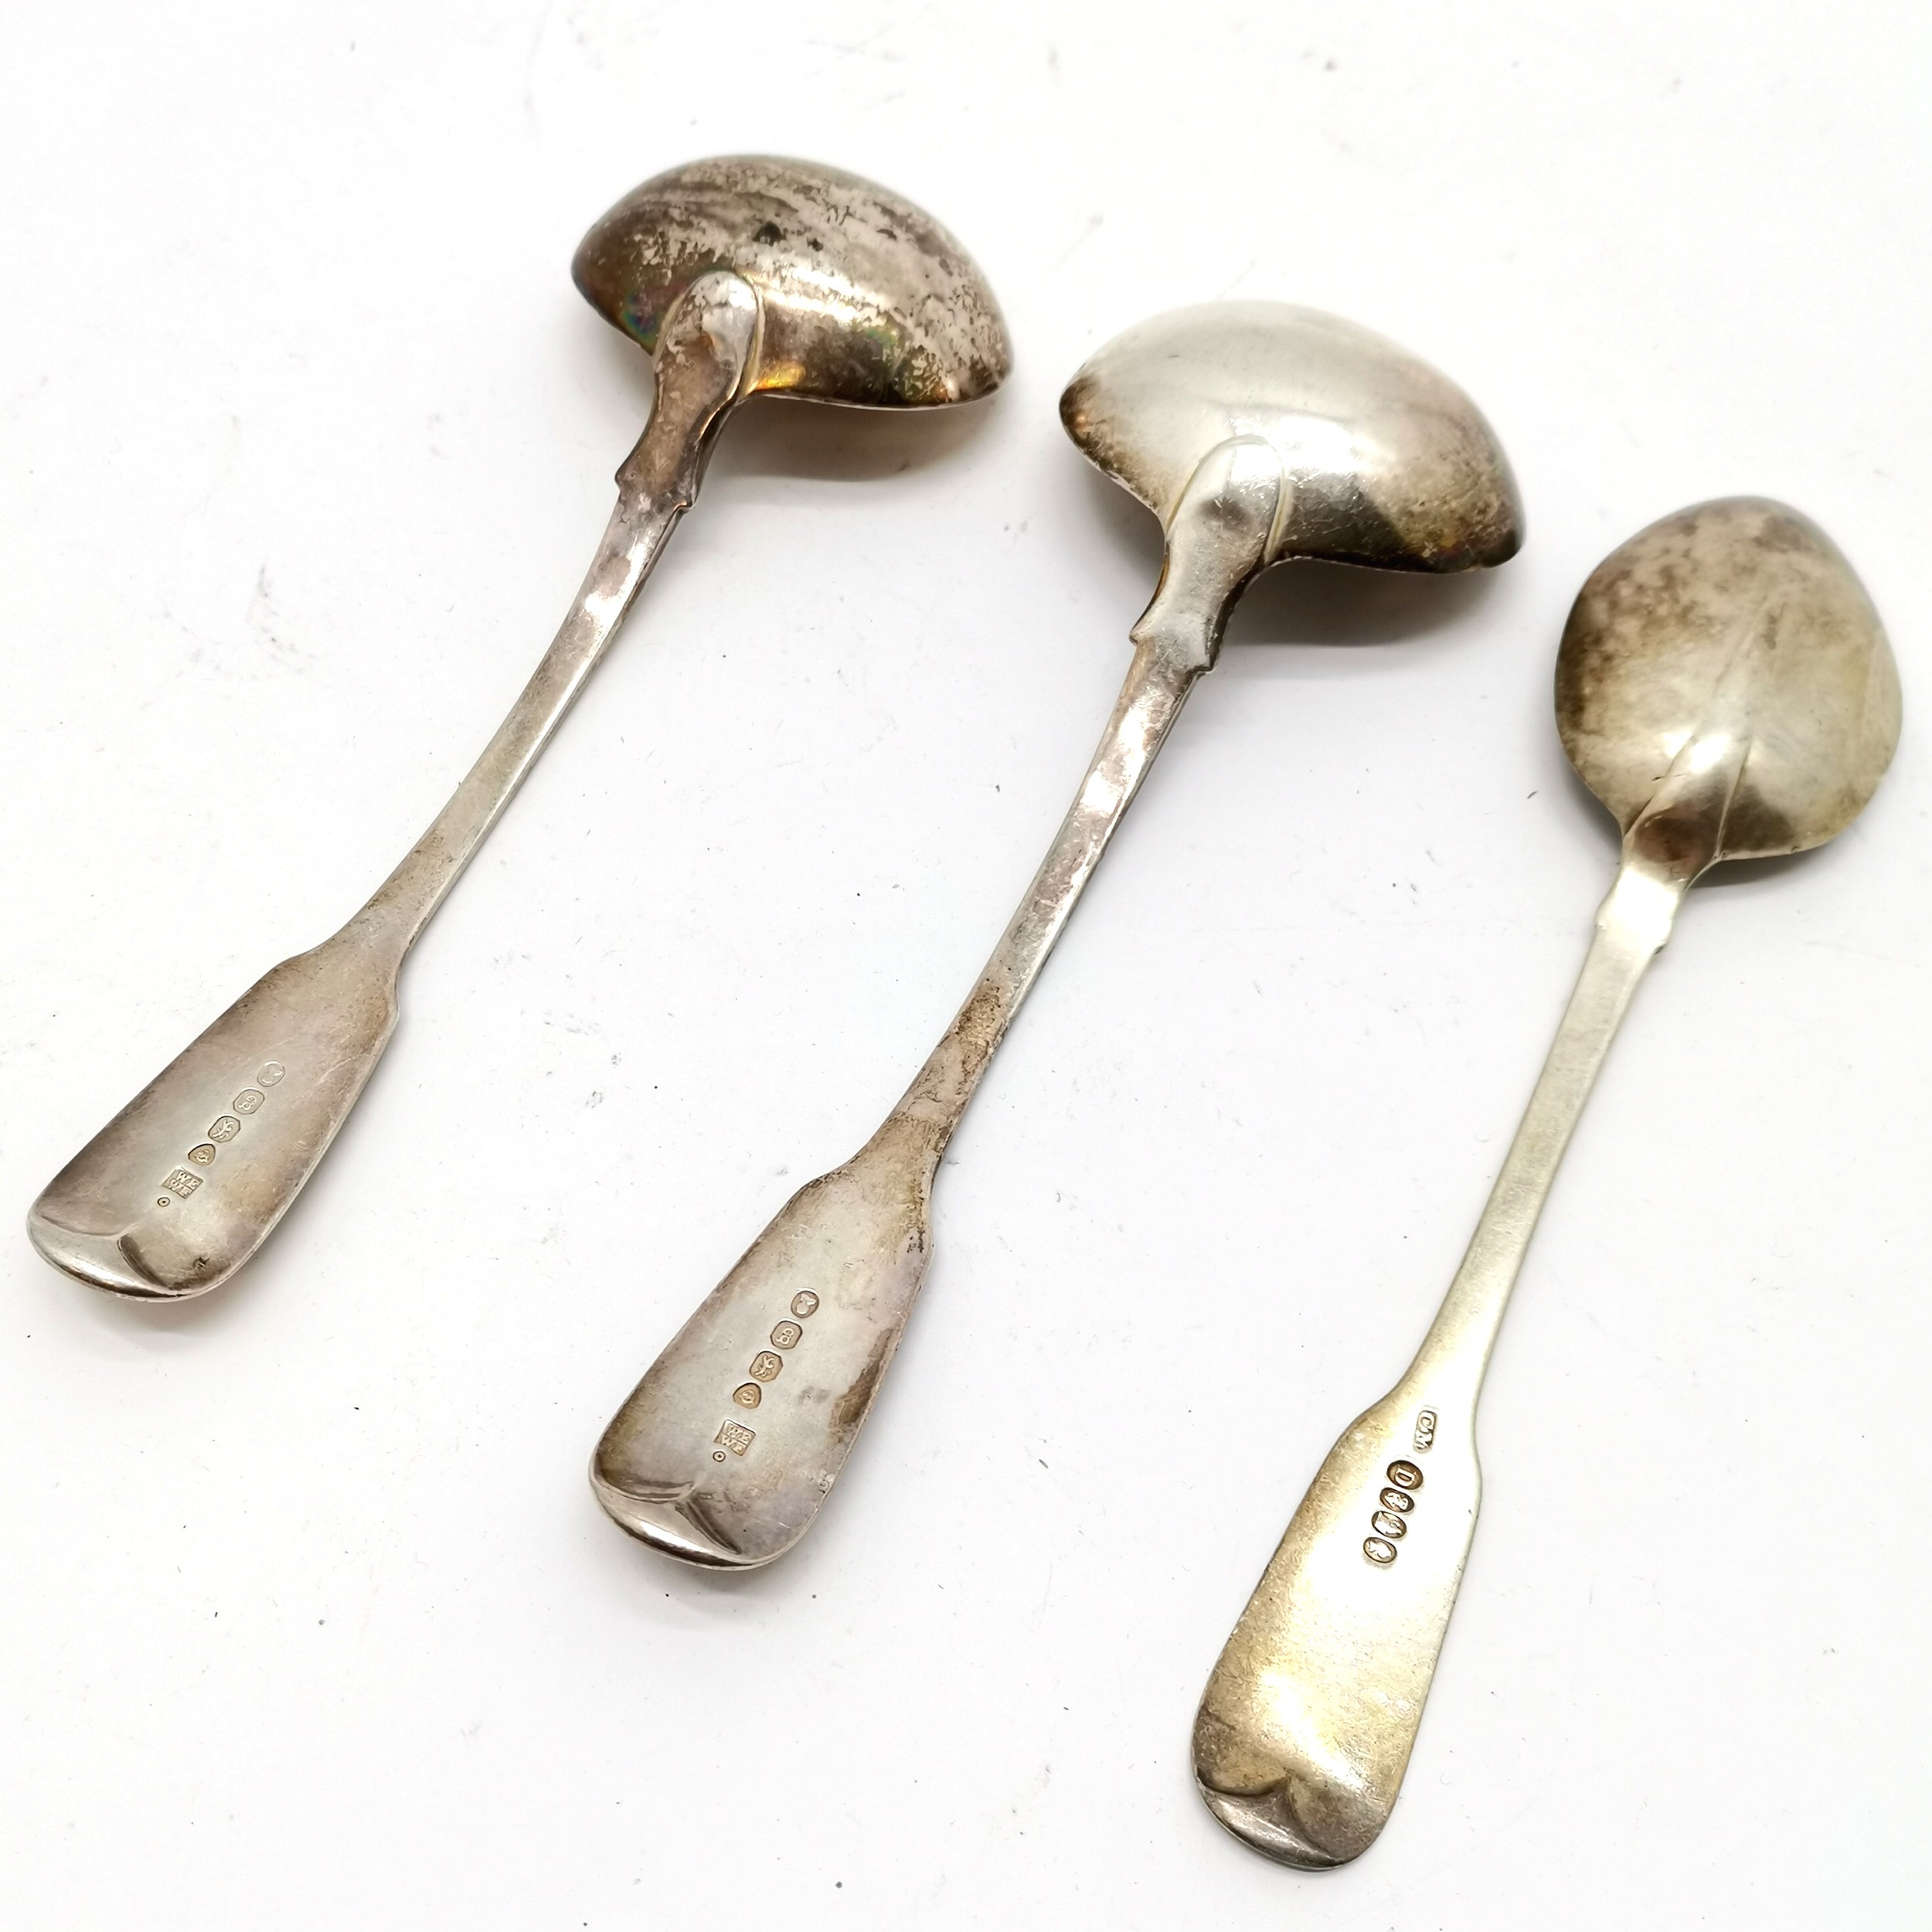 Pair of 1822 fiddle ladles by William Eley & William Fearn t/w 1824 rat tailed spoon by Charles - Image 2 of 6